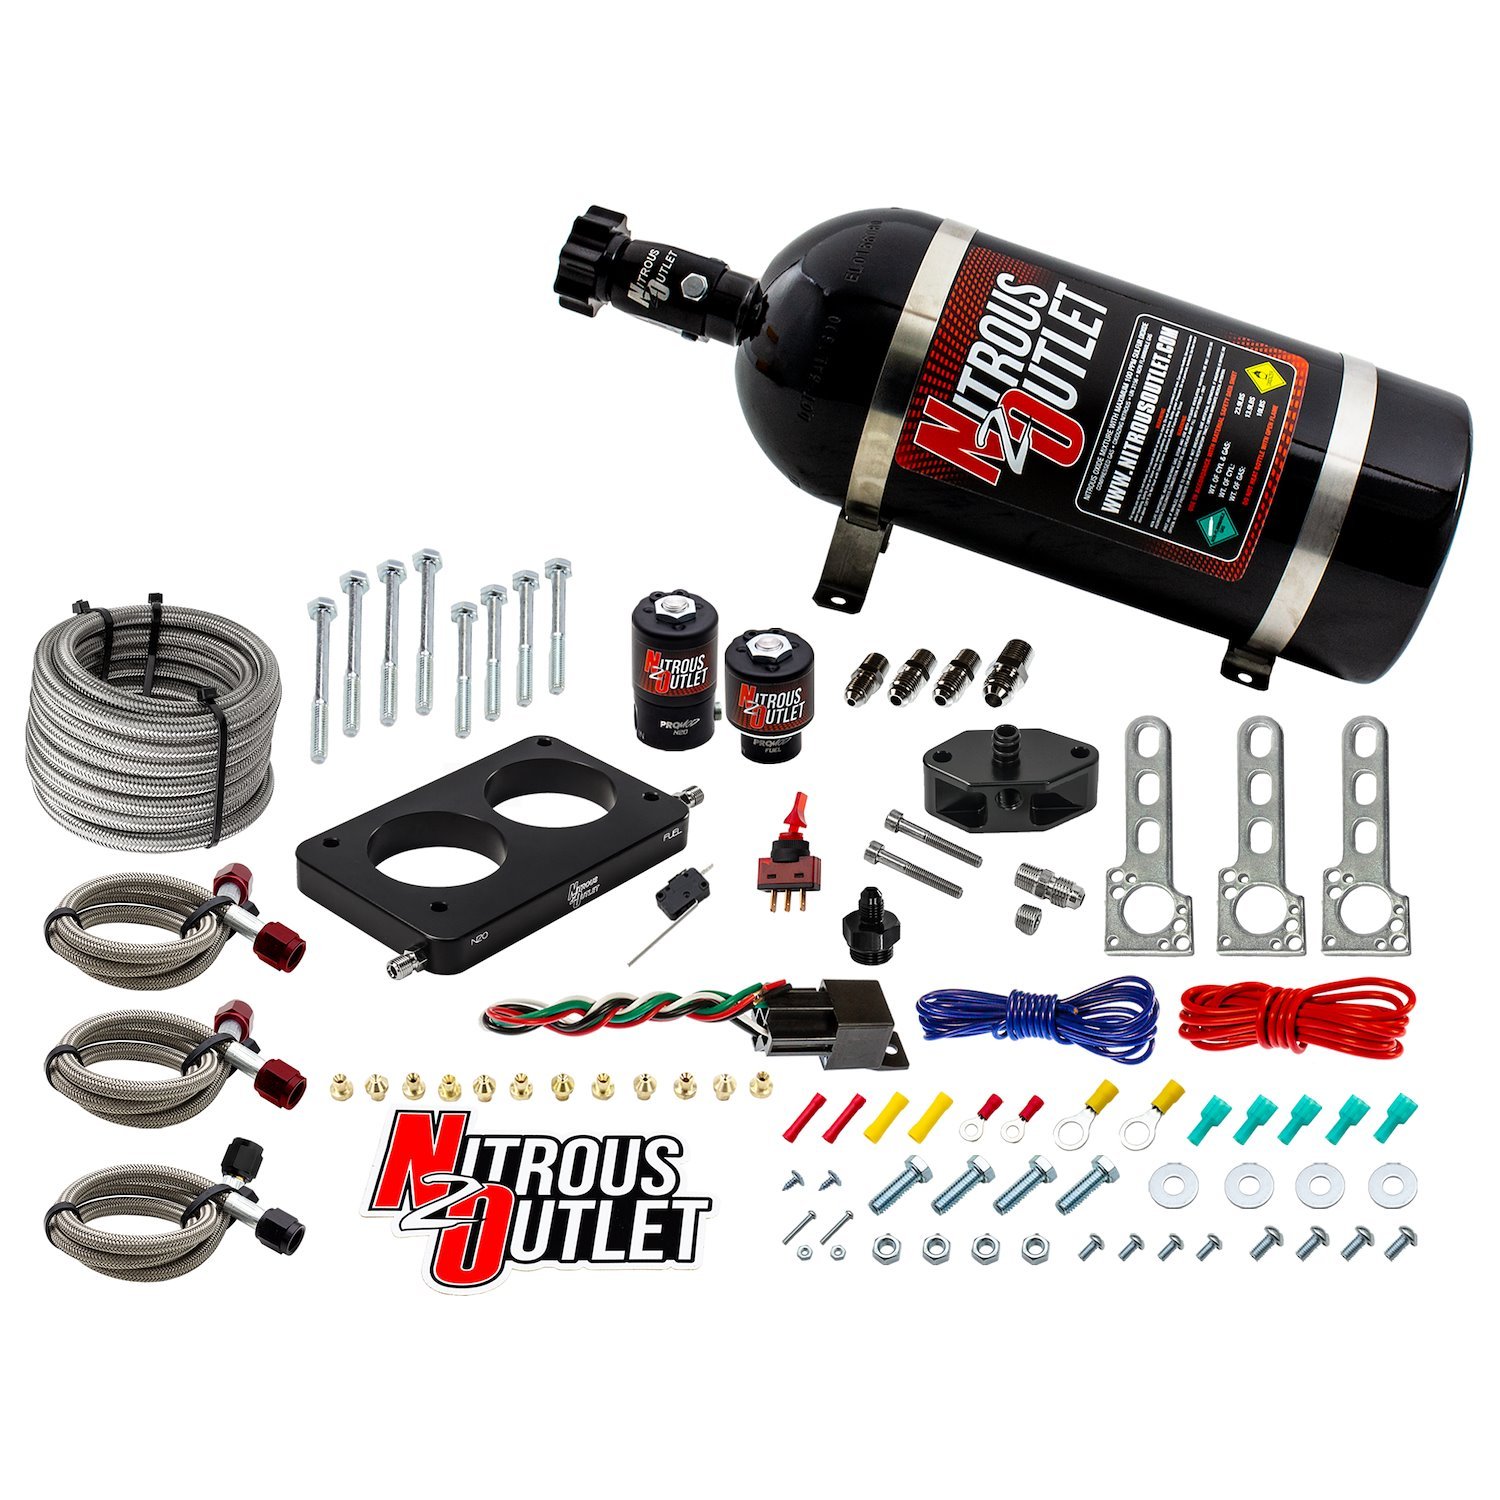 00-10142-10 Ford 2005-2010 4.6L 3V Mustang Plate System, Gas/E85, 5-55psi, 50-200HP, 10lb Bottle